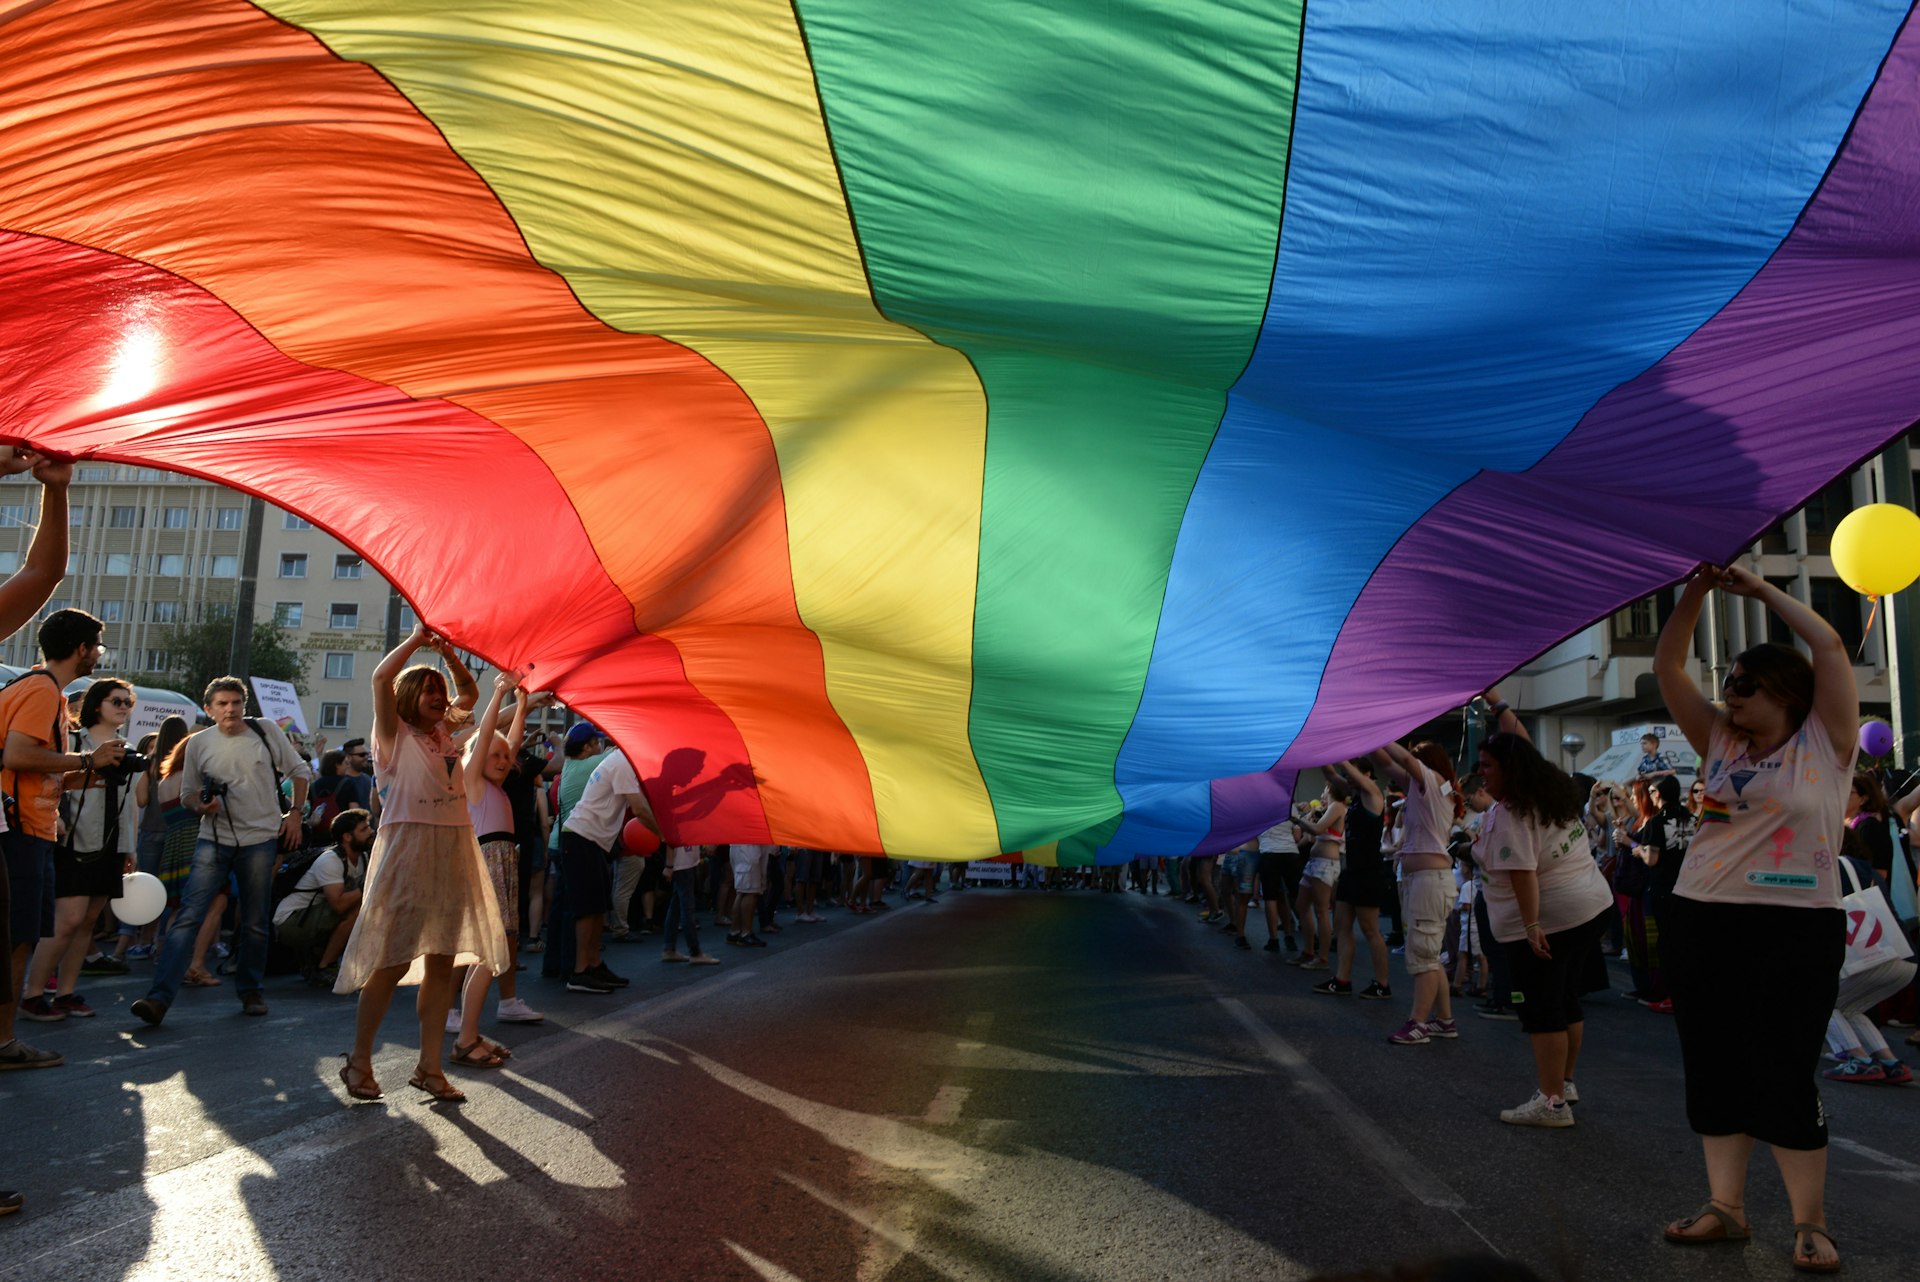 Participants lift a giant rainbow flag above the street during the annual Gay Pride parade event in central Athens.